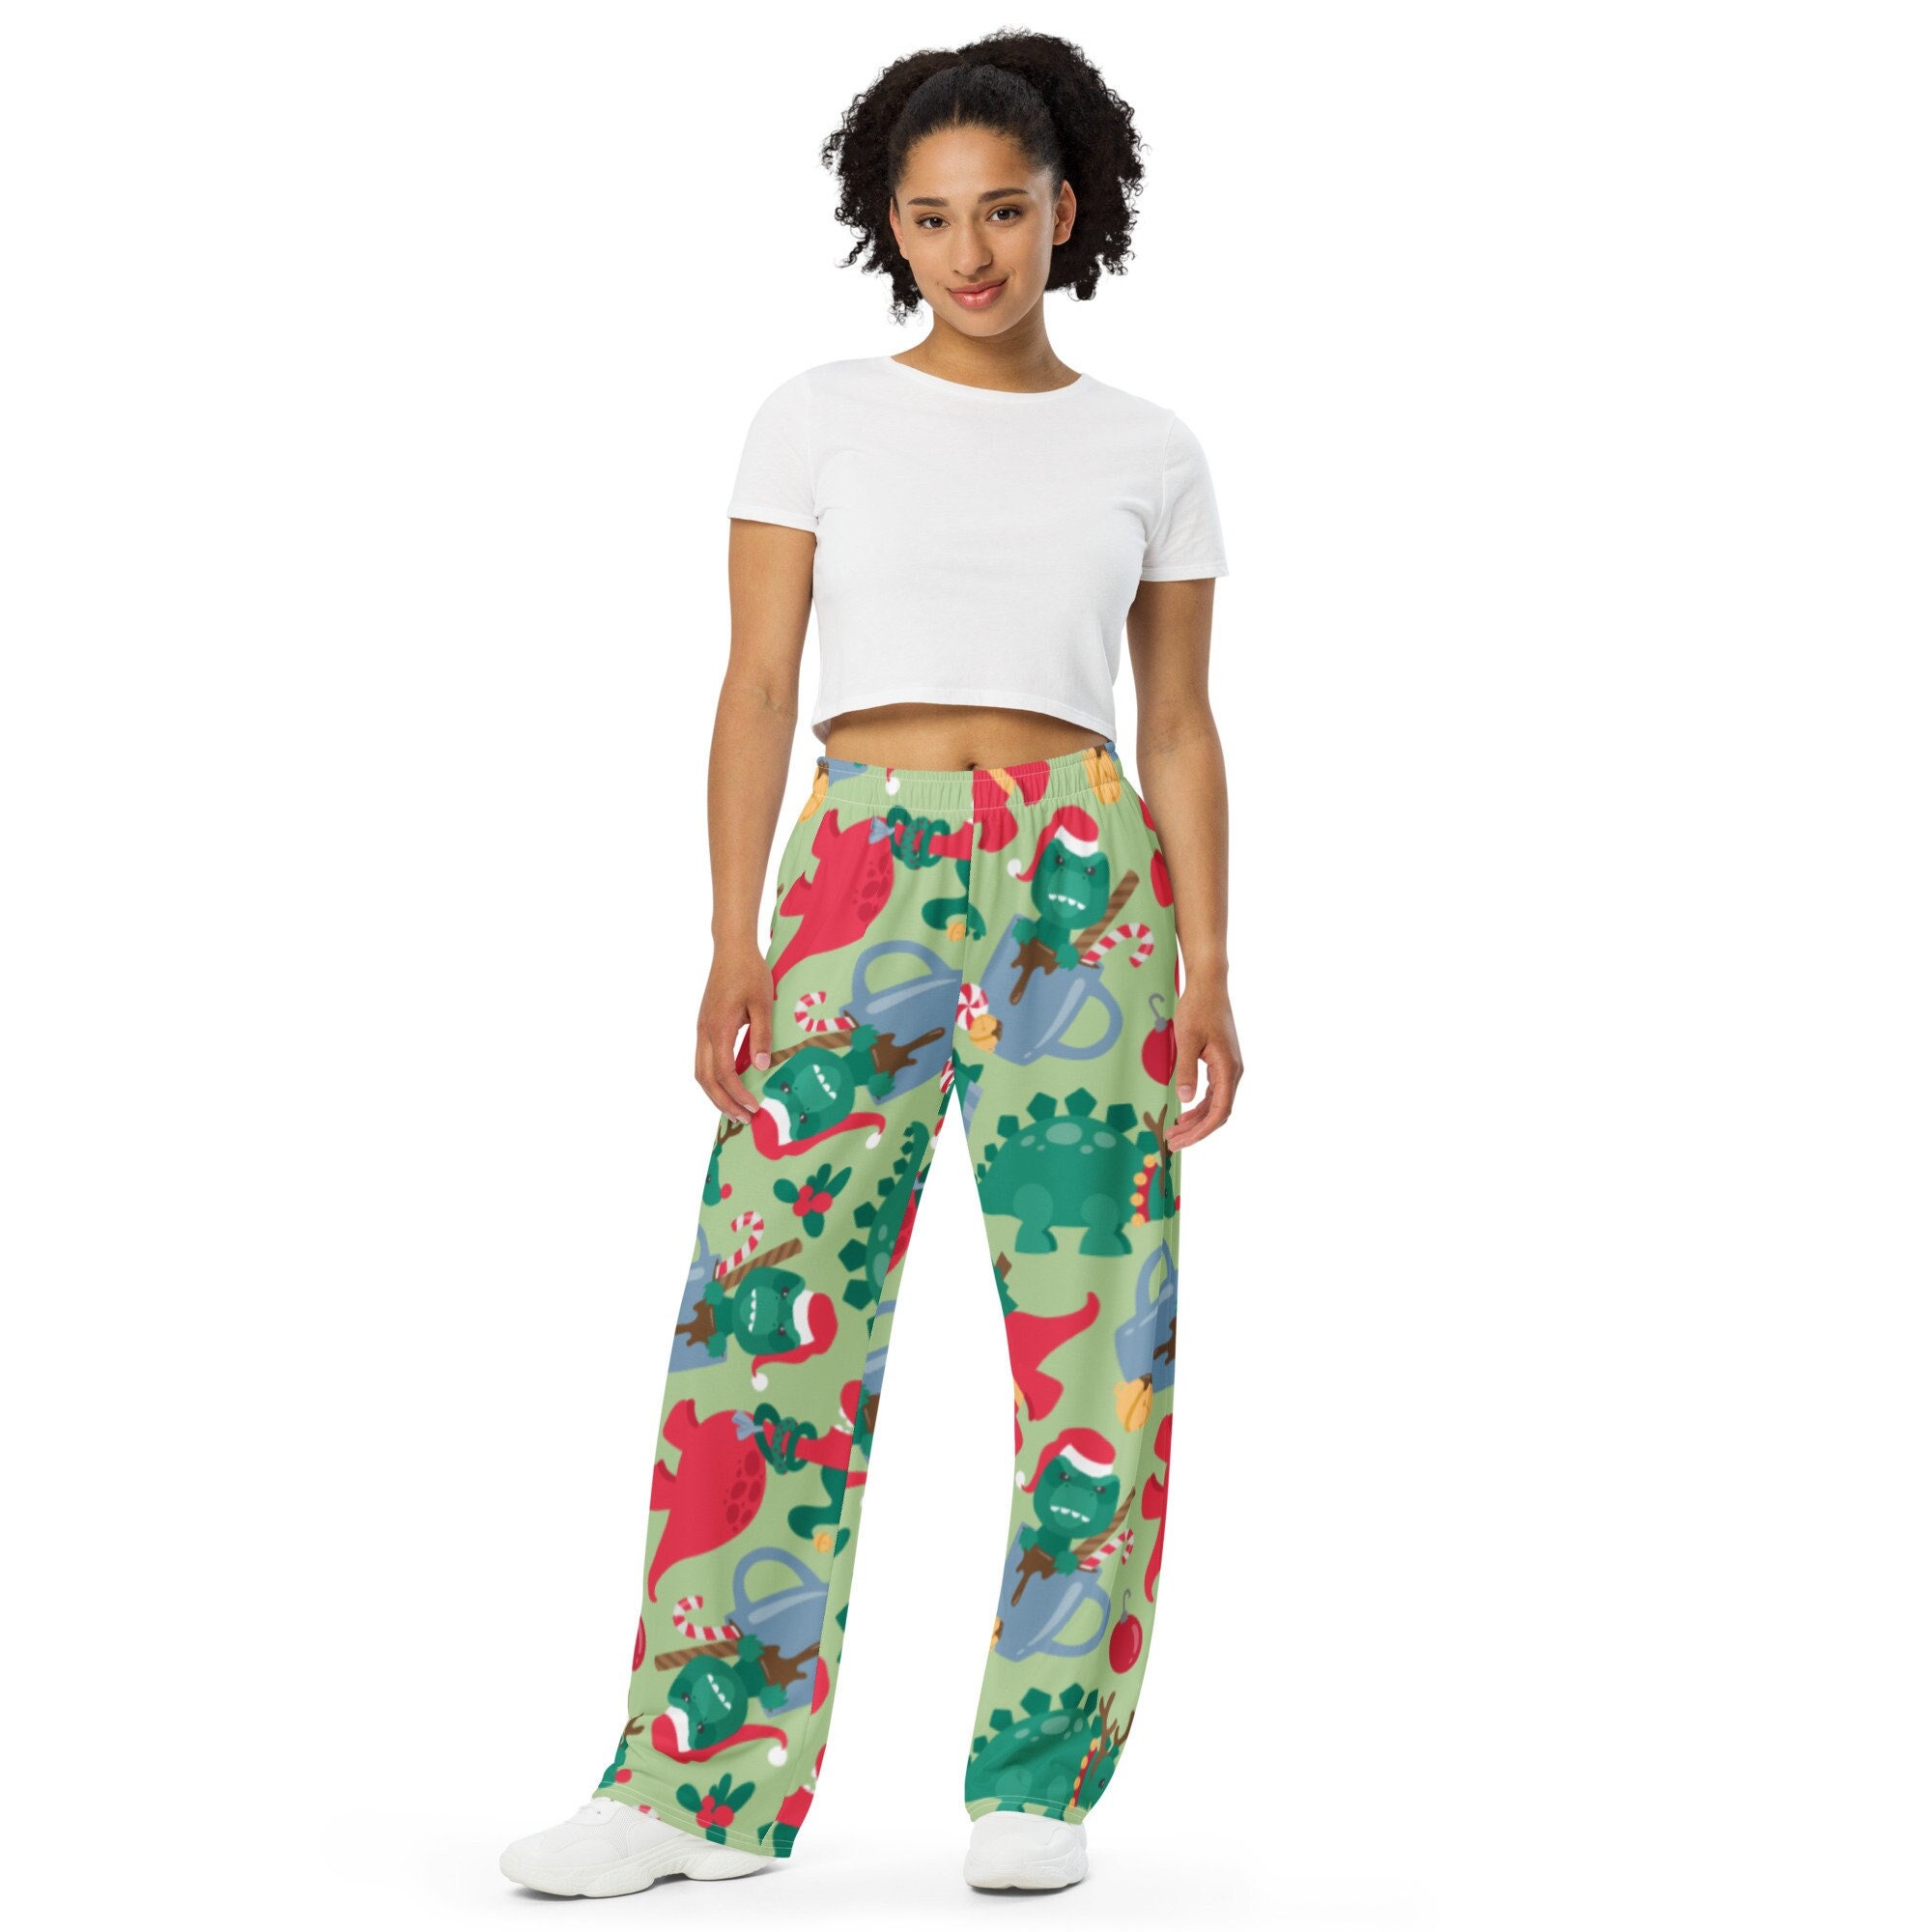 Adult and Youth Pajama/Lounge Pants Unique and Fun 